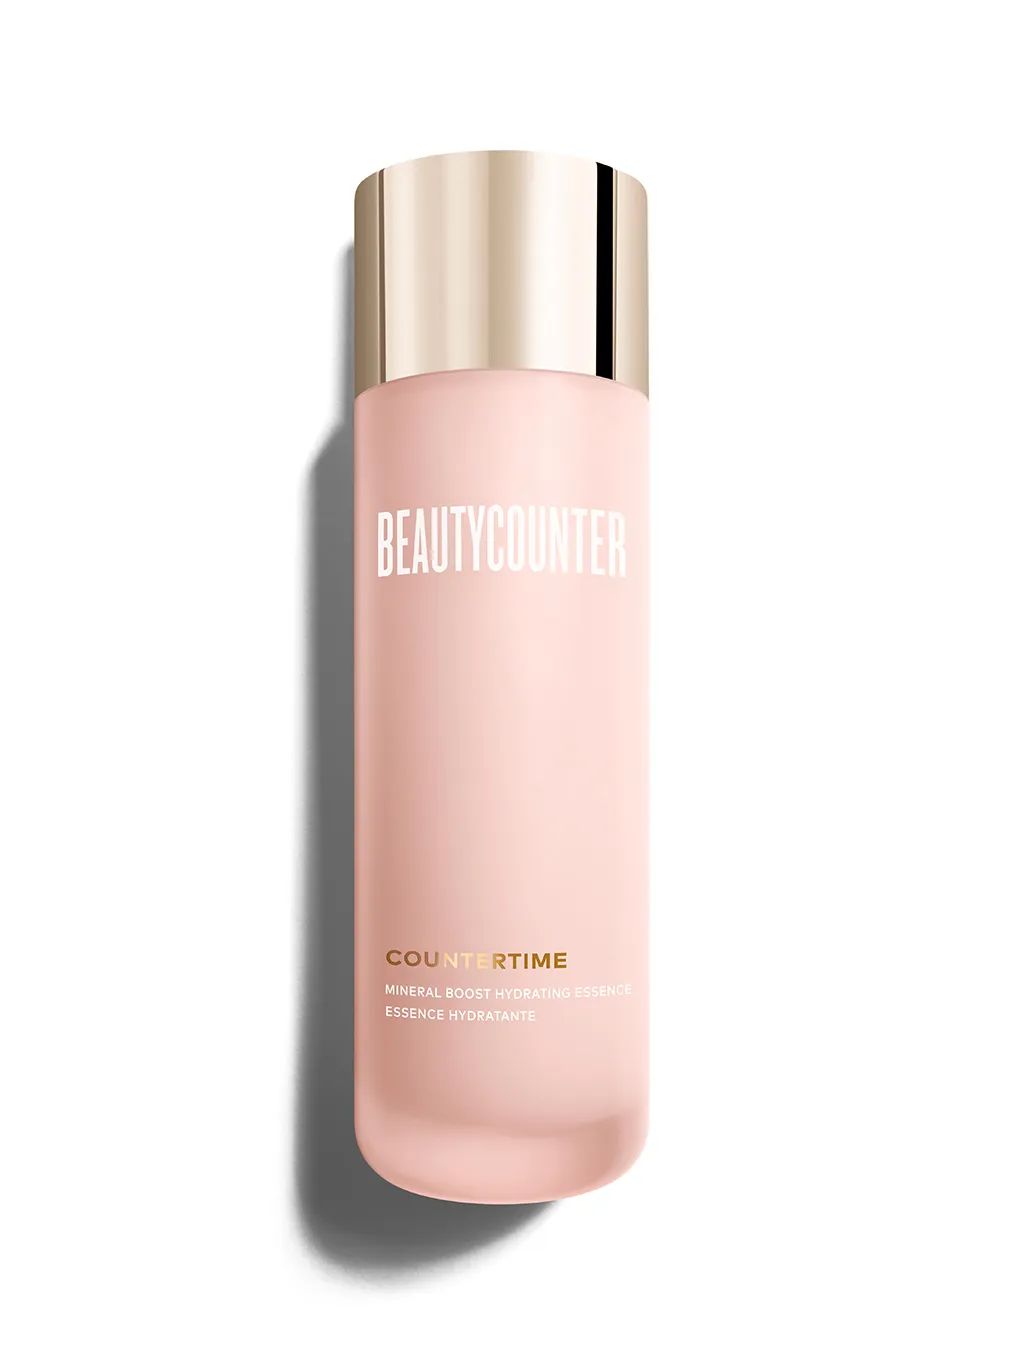 Countertime Mineral Boost Hydrating Essence - Beautycounter - Skin Care, Makeup, Bath and Body an... | Beautycounter.com